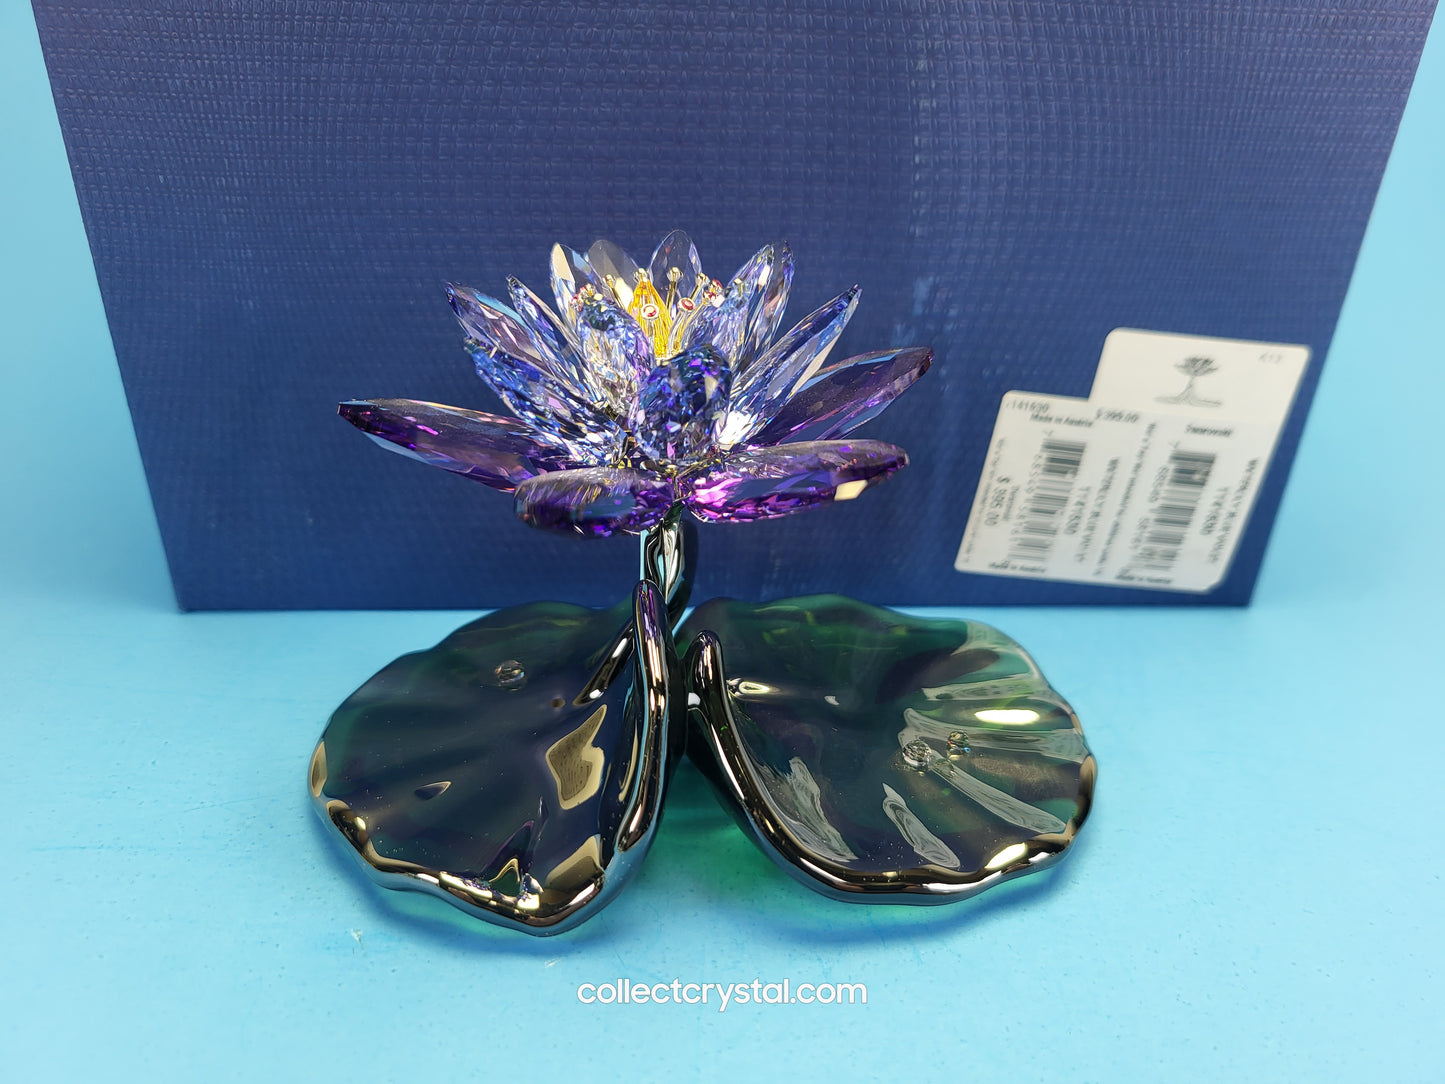 Water Lily Flower PARADISE FLOWERS – WATERLILY BLUE VIOLET 1141630